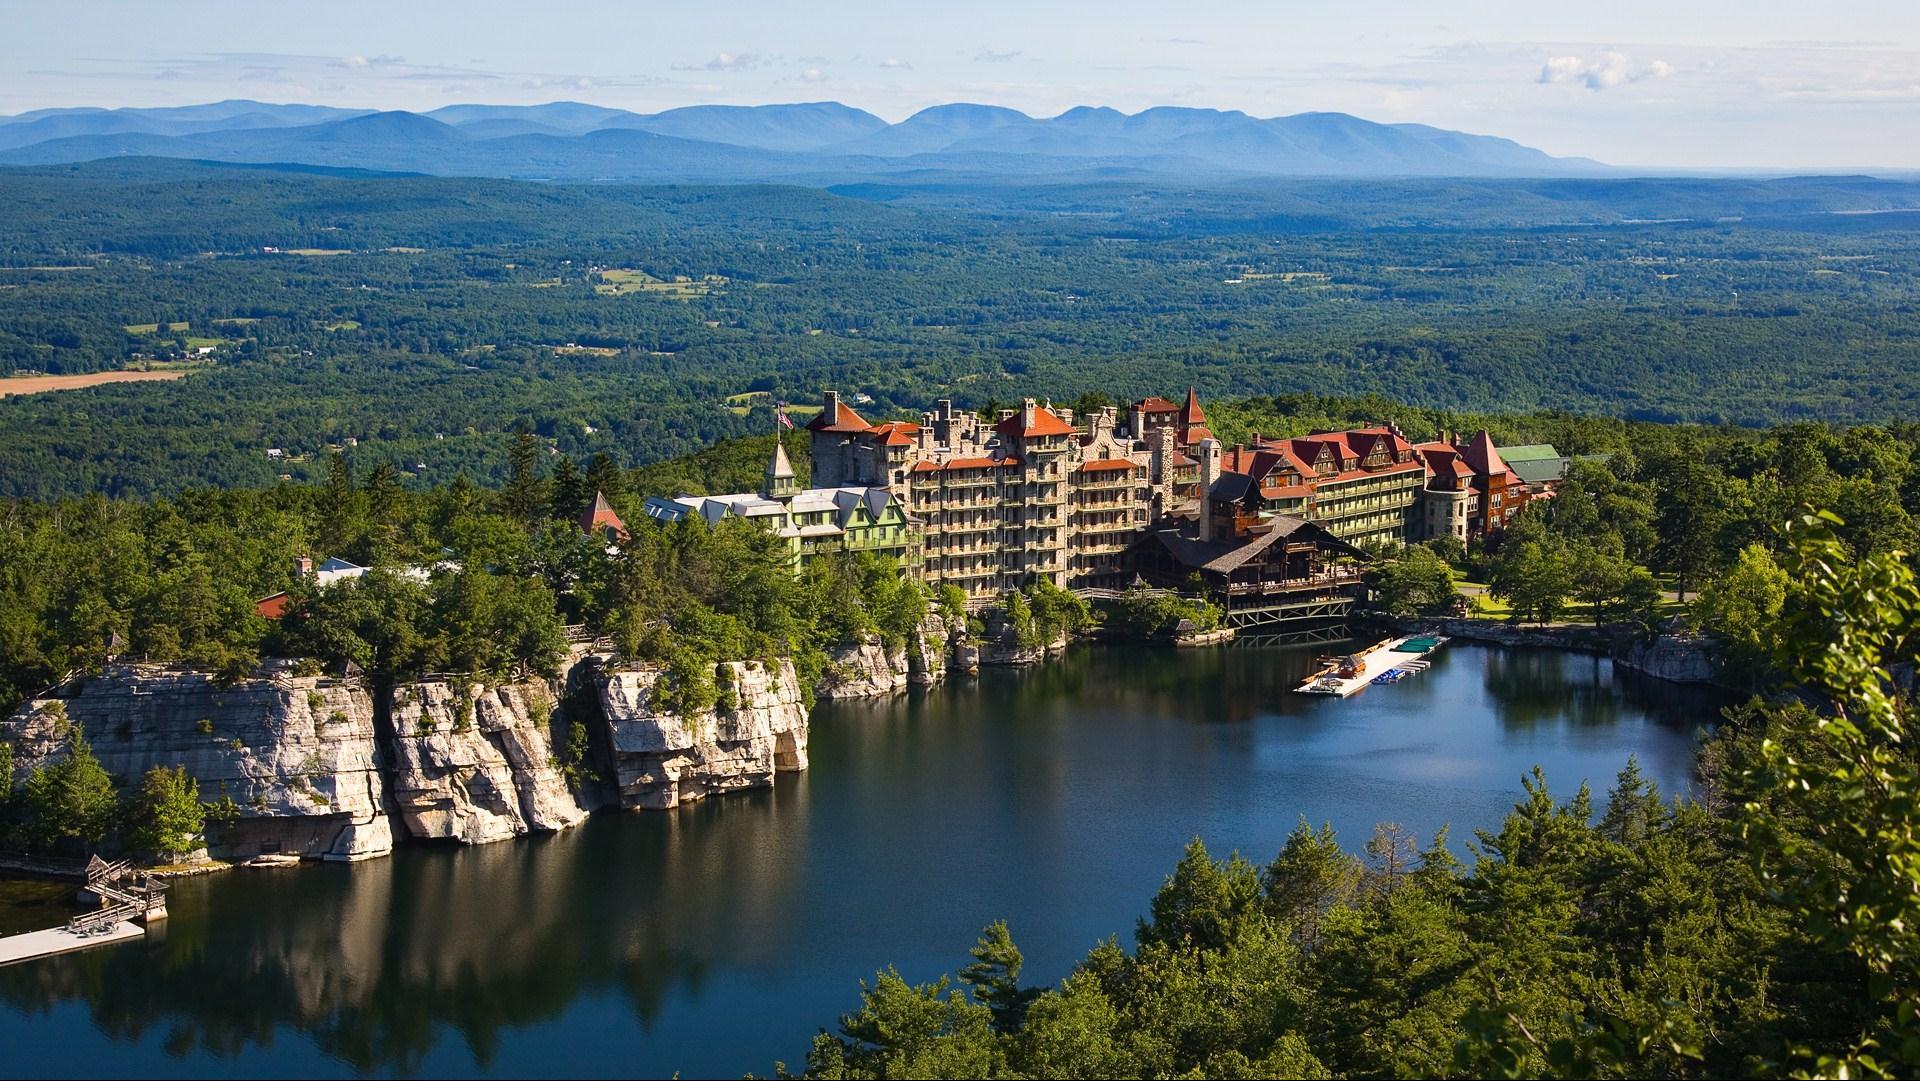 Mohonk Mountain House in New Paltz, NY